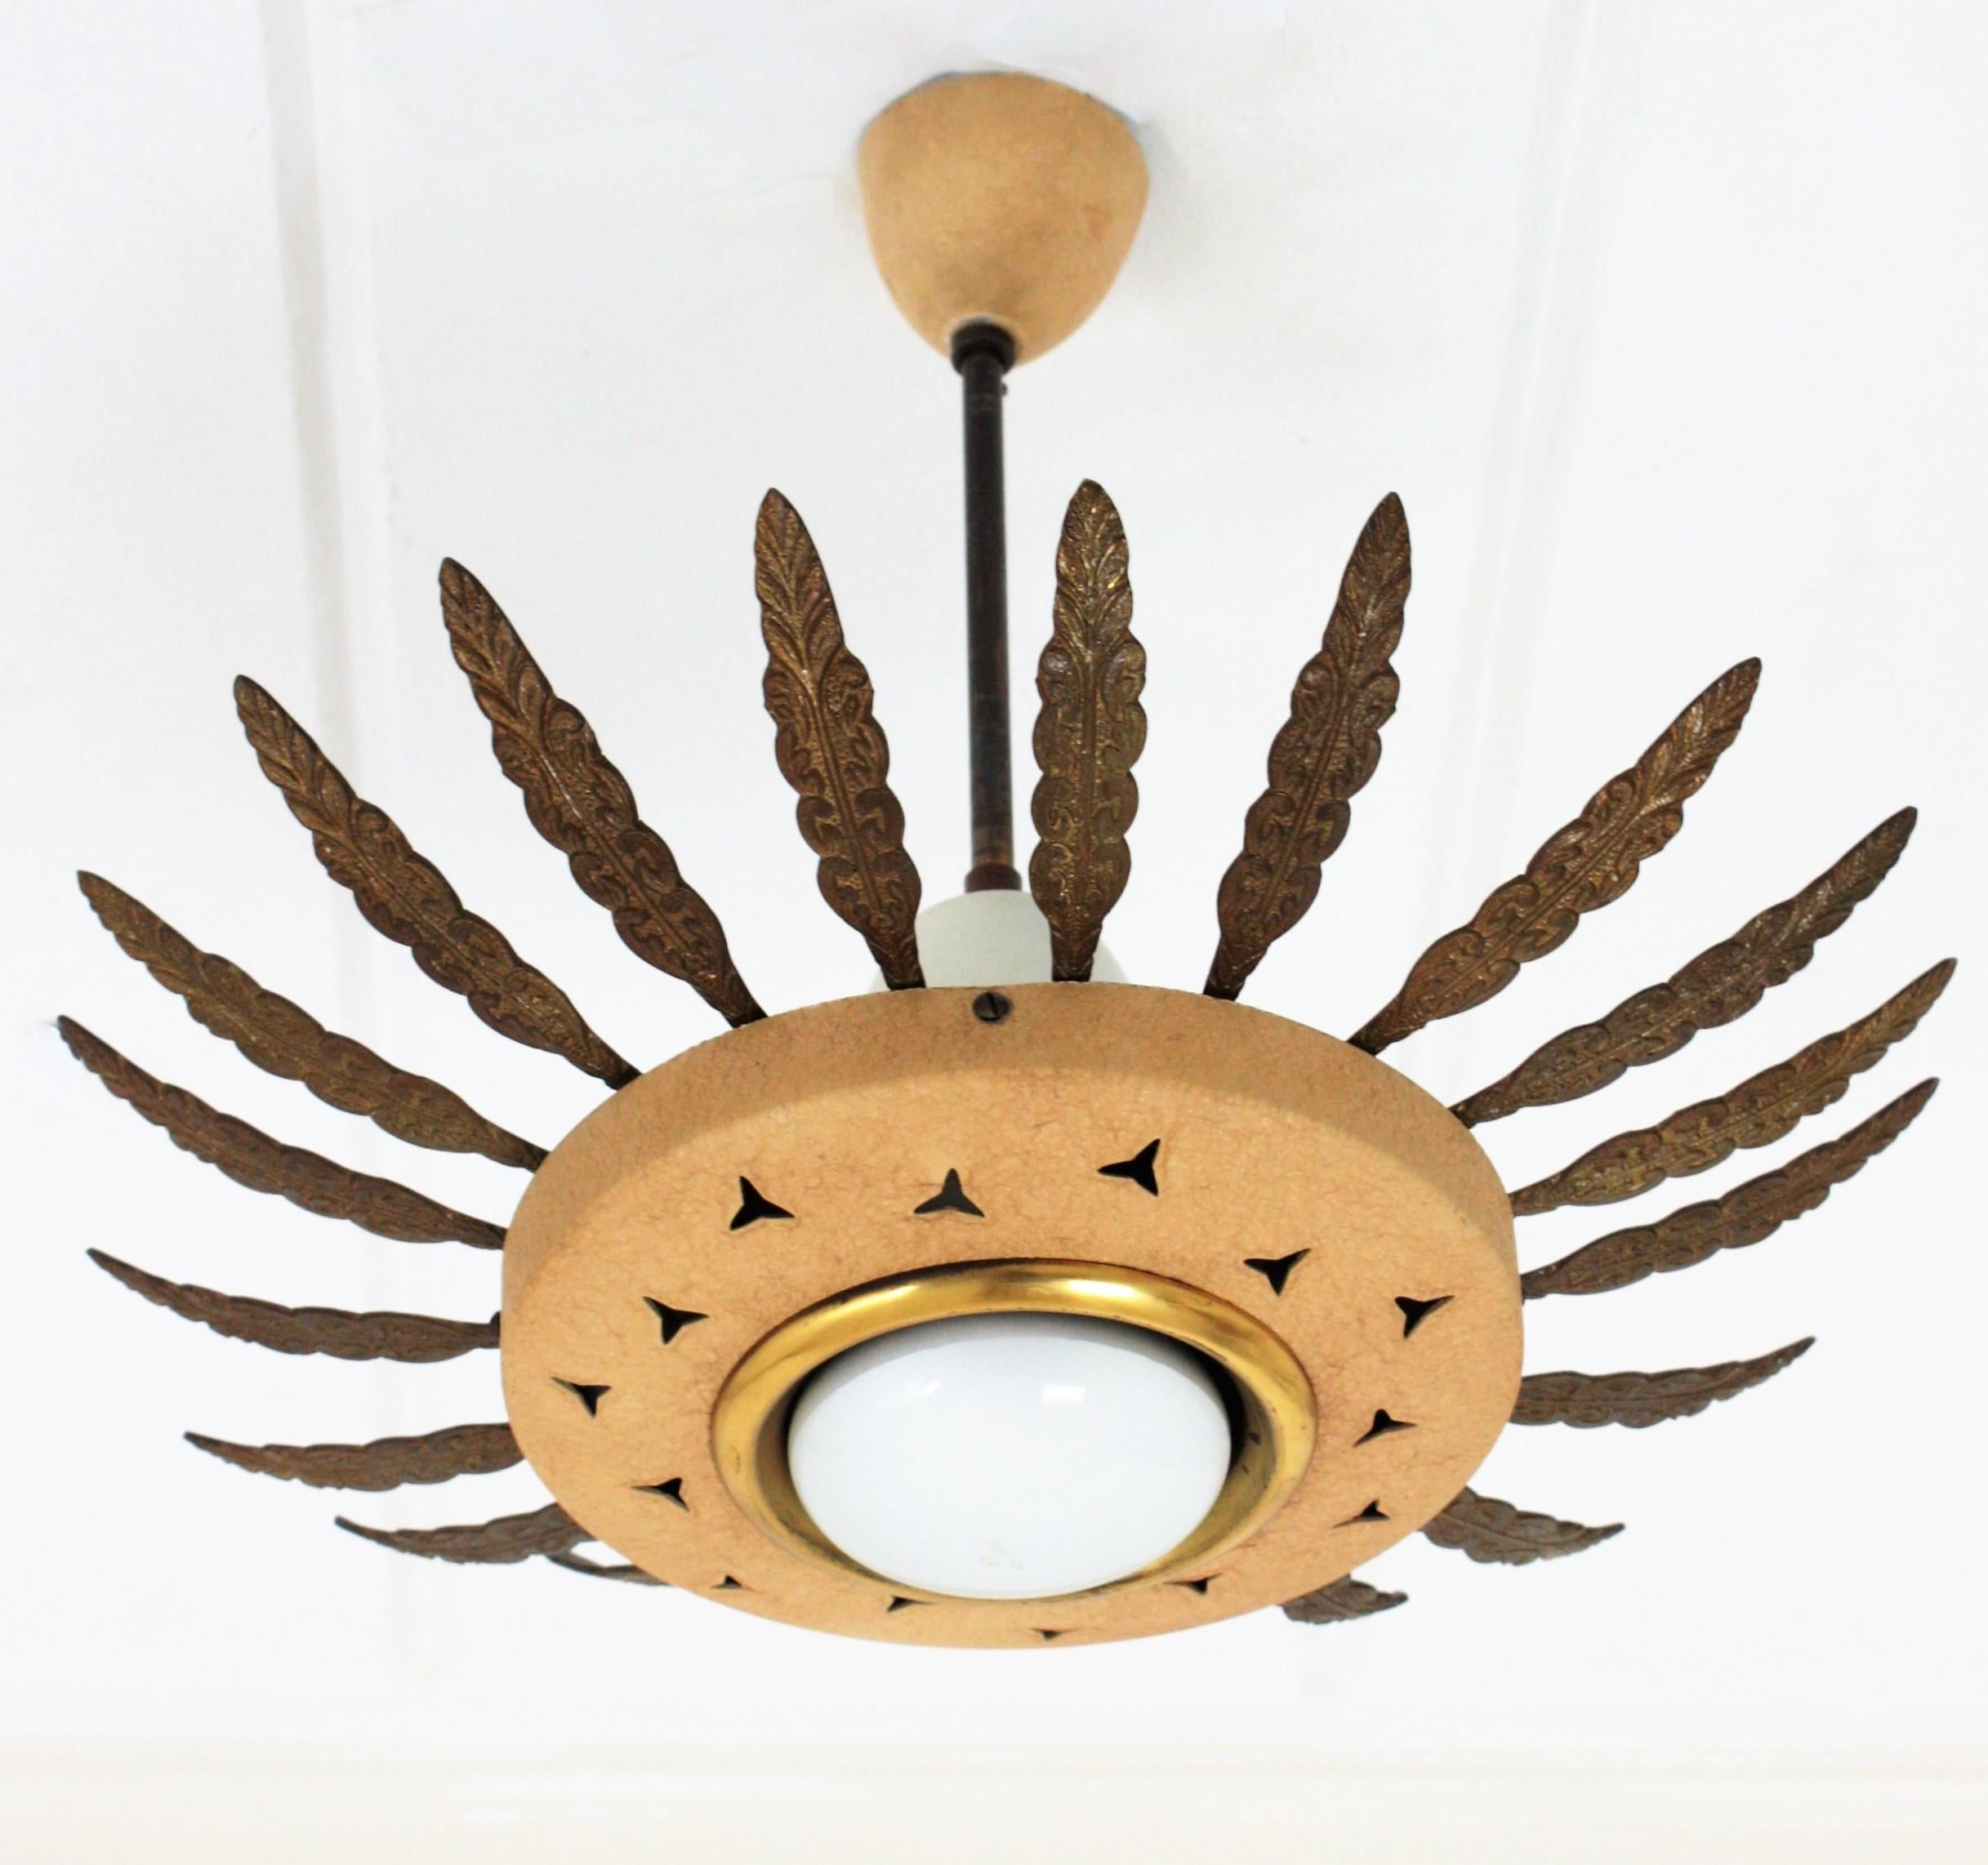 Mid-Century Modern beige lacquered metal and brass sunburst suspension light, chandelier or light fixture. Italy, 1950s.
This eye-catching ceiling lamp features a beige lacquered metal shade surrounded by brass leaves with foliate and scroll